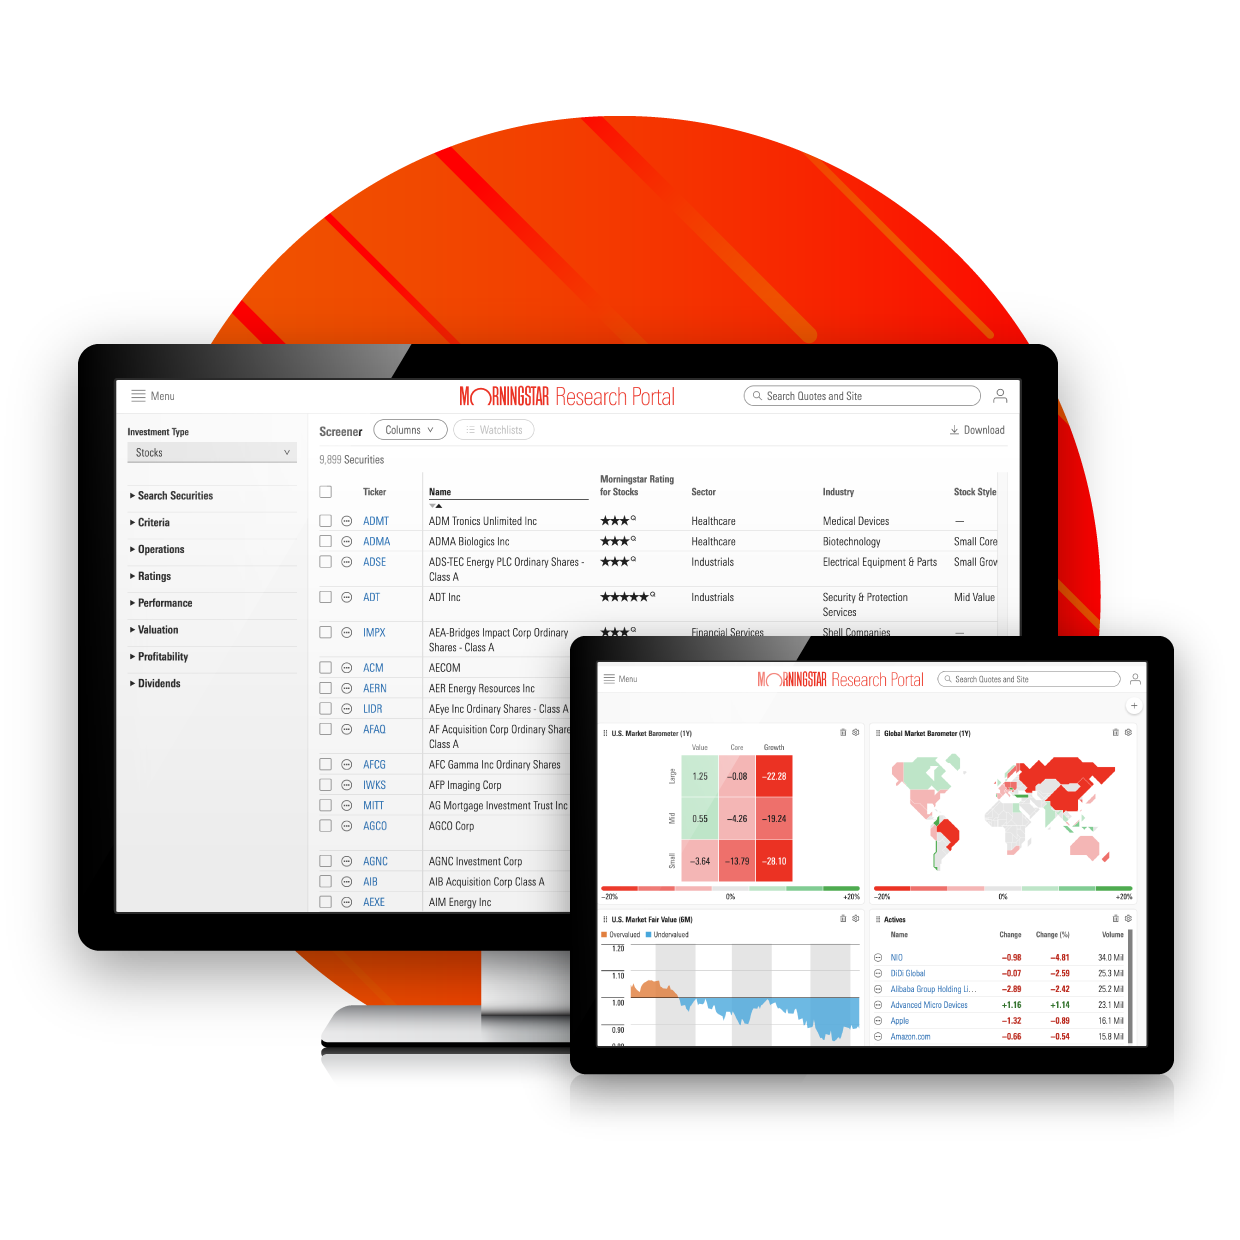 Get Started with Morningstar Research Portal